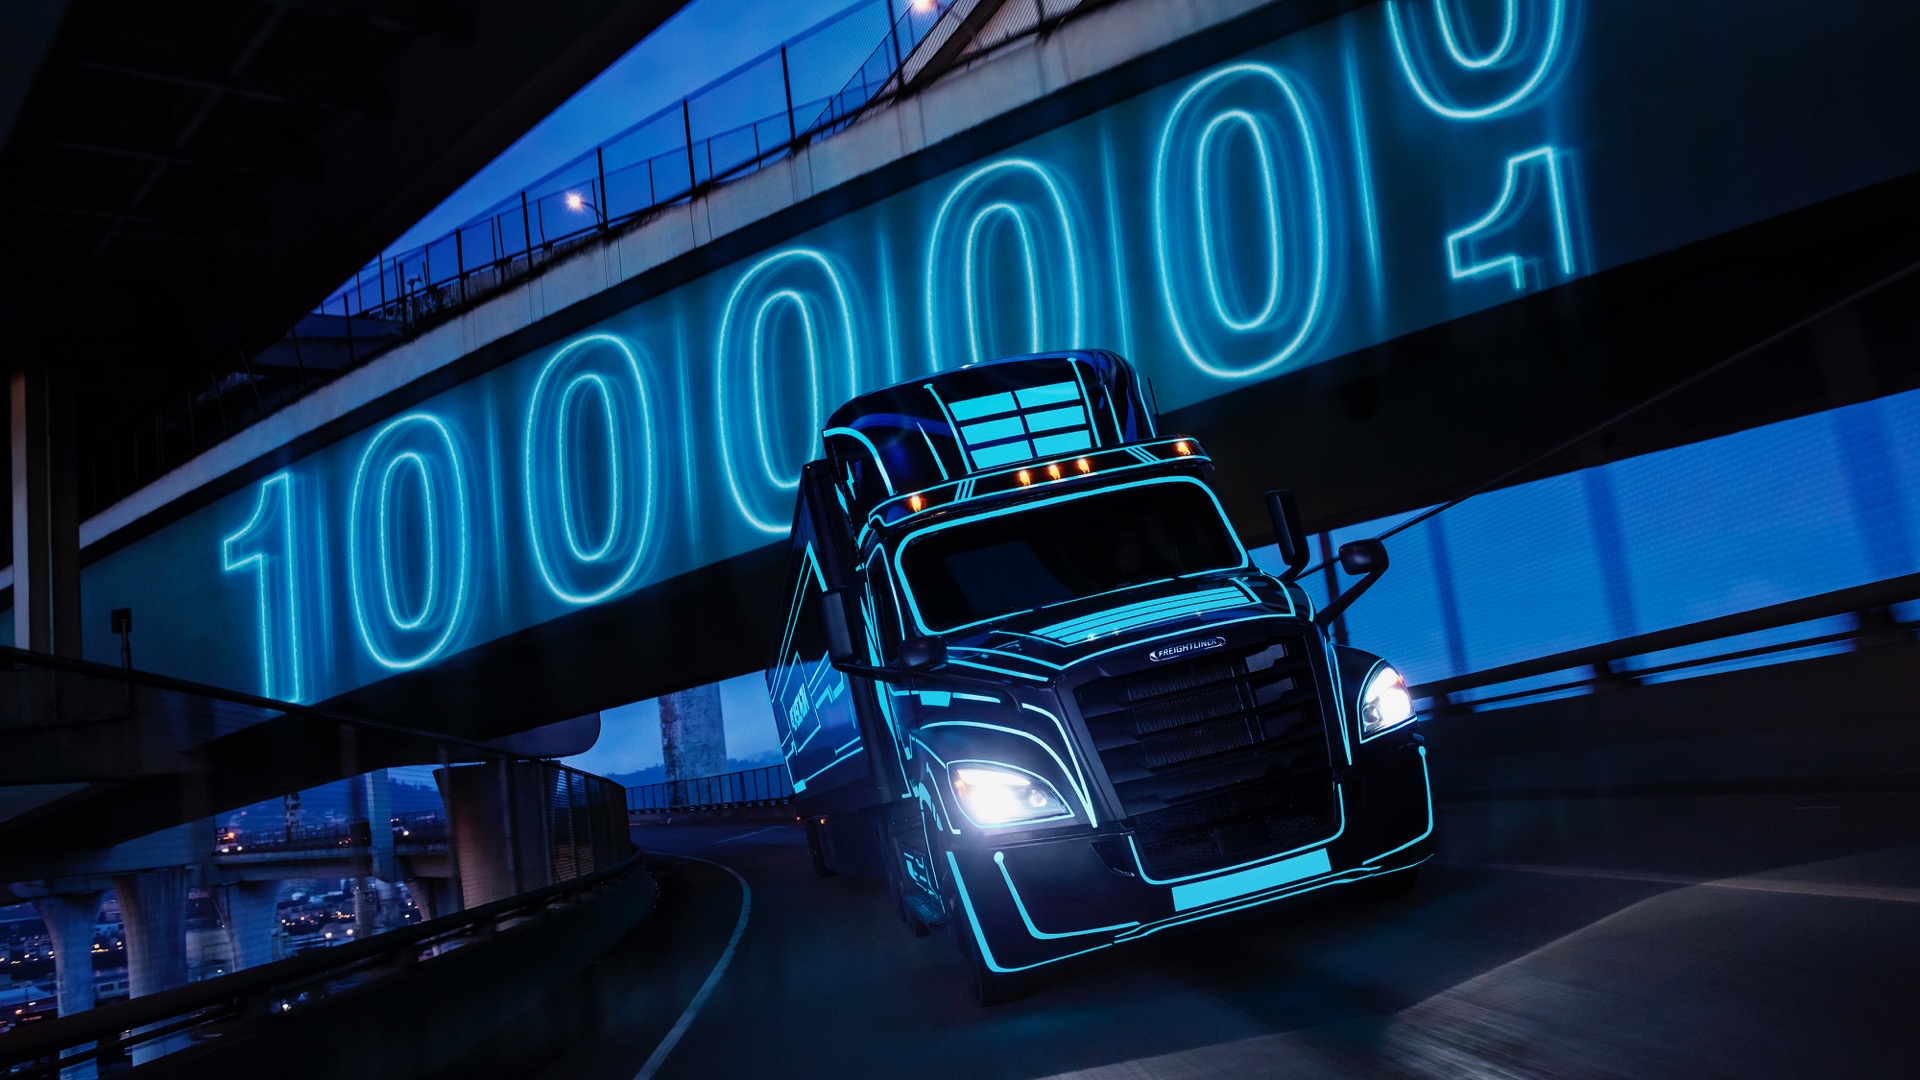 What have Daimler electric truck fleets taught over a million real-world miles?What have Daimler electric truck fleets taught over a million real-world miles?